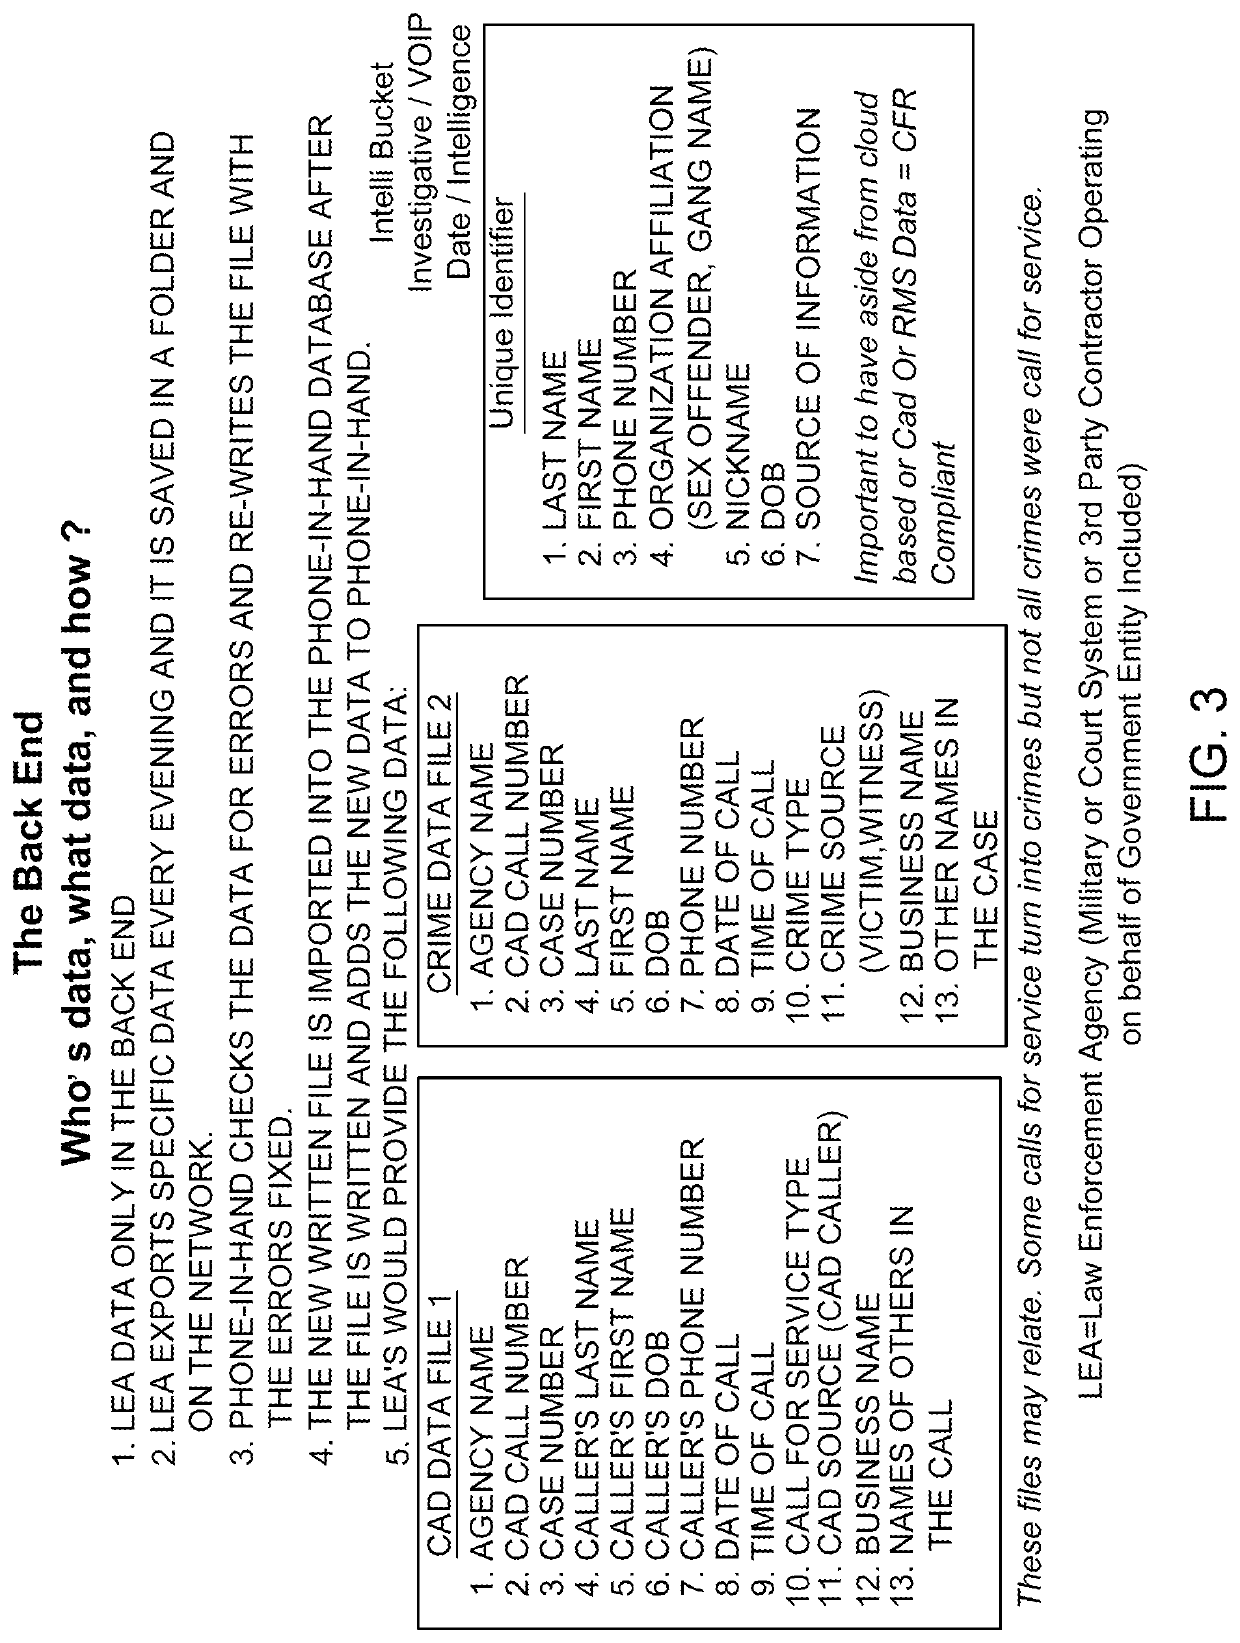 Systems and methods for information gathering, managing and disseminating for assessments and notifications in law enforcement and other environments